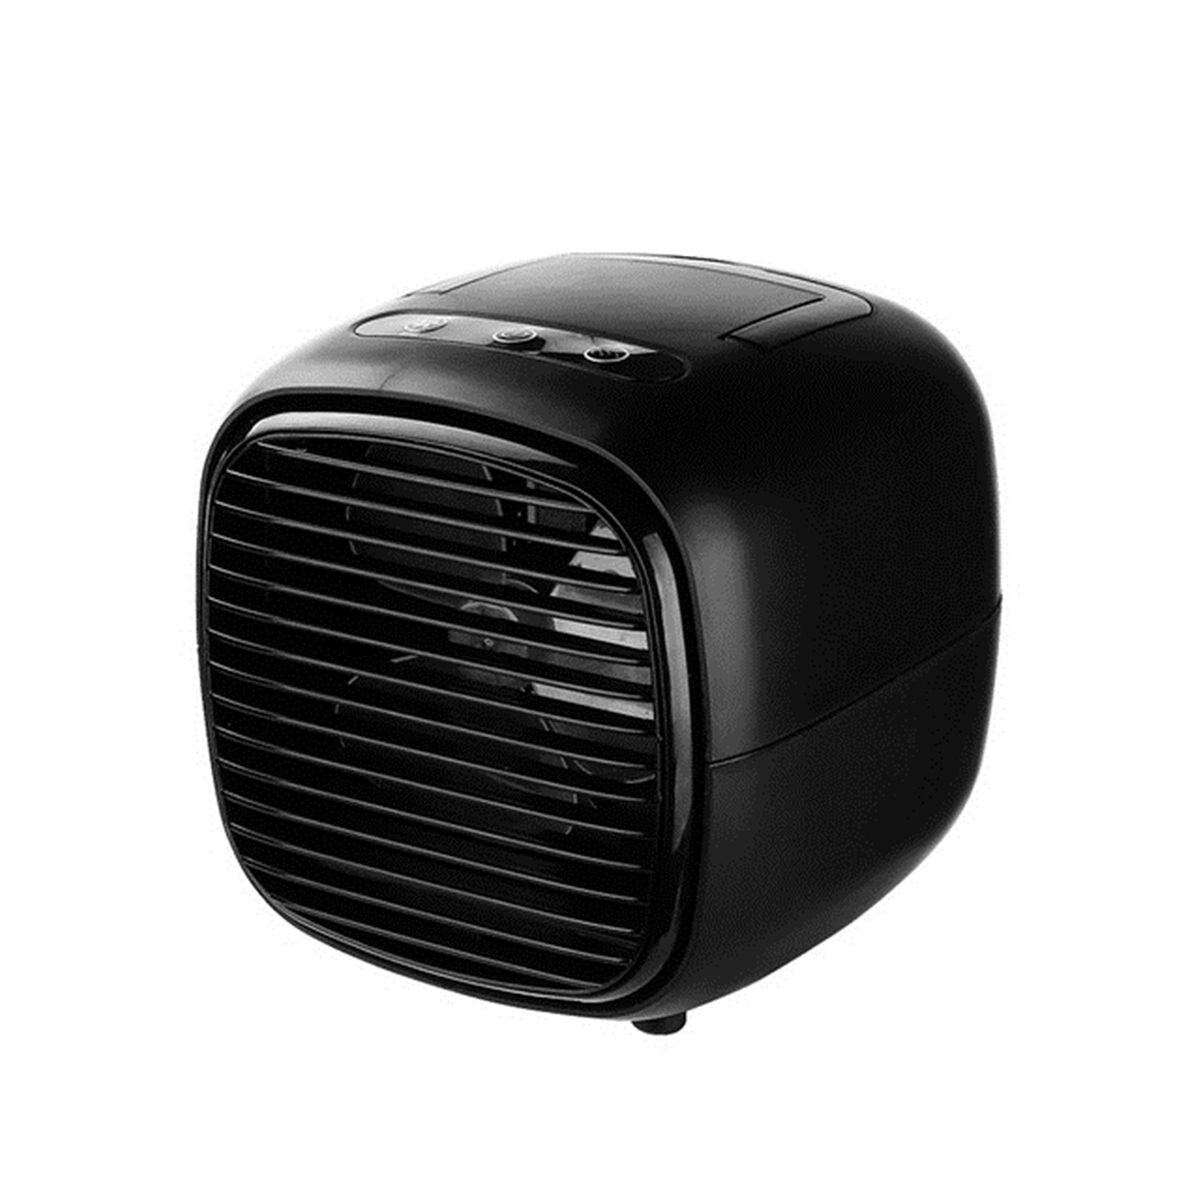 Humidifiers Mini Air Conditioner Air Cooler Fans USB Portable Air Cooler Table mini Fan For Office Home Car Refrigerating Device: Black